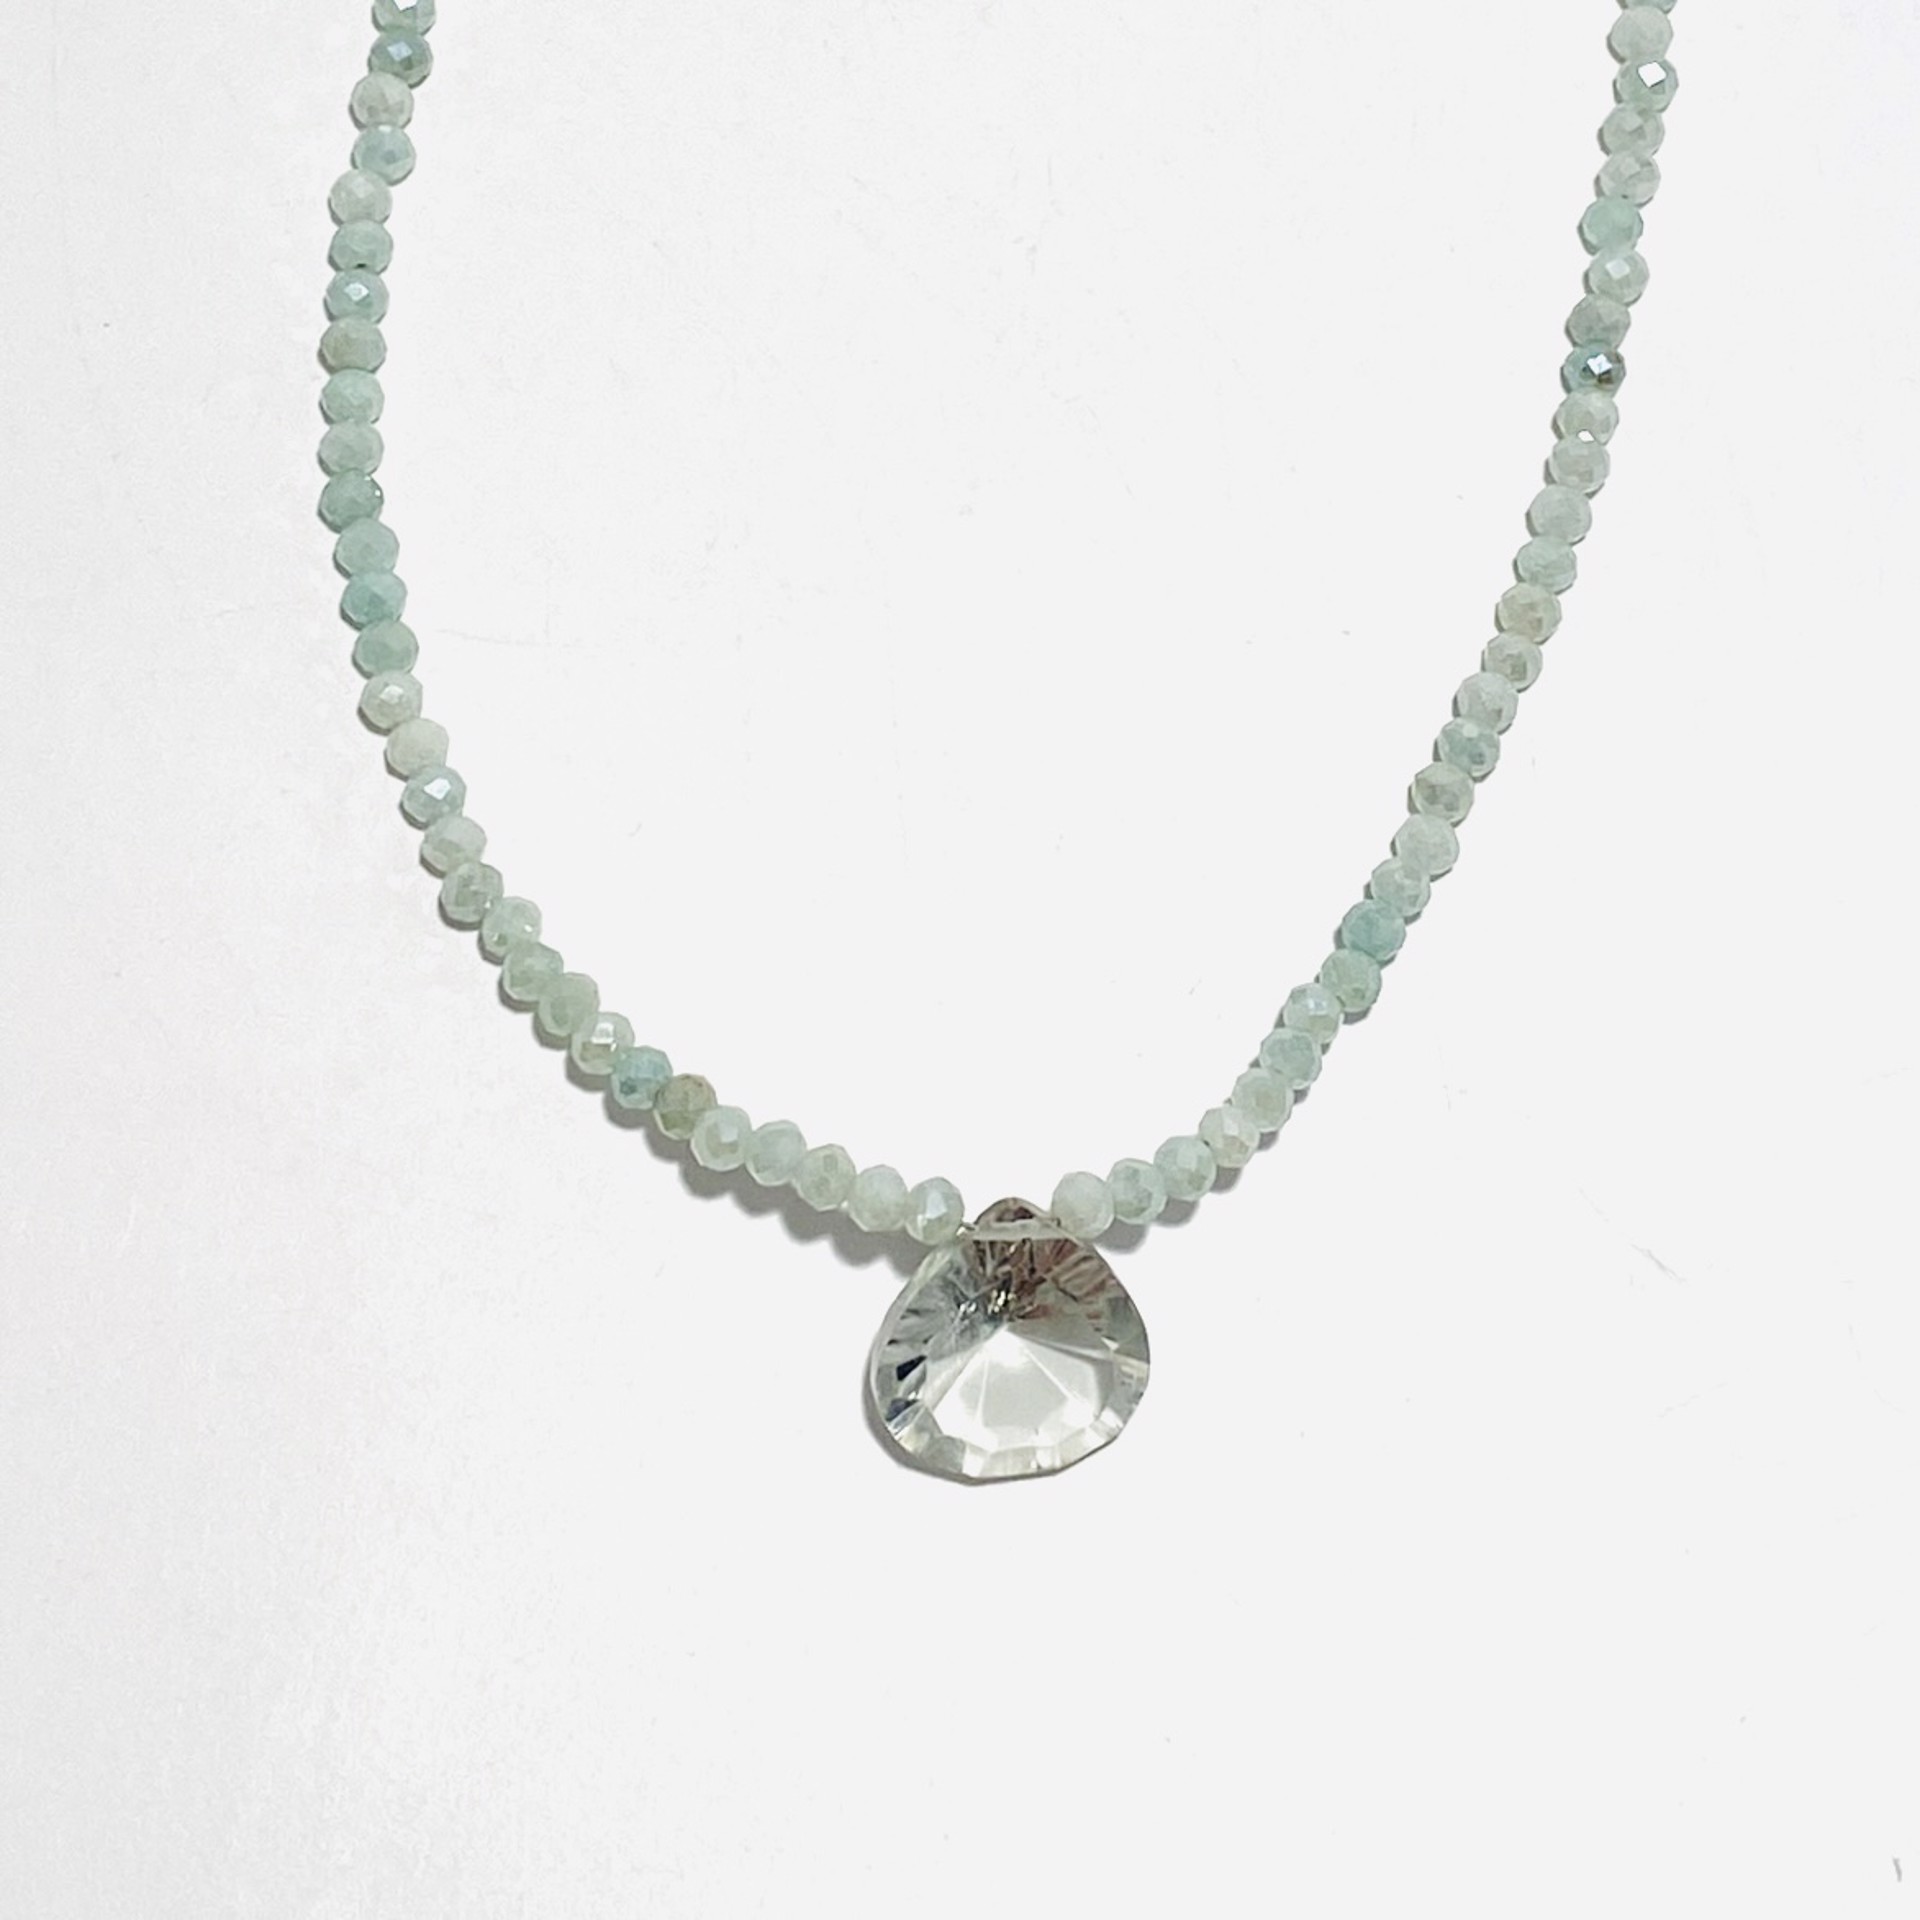 Faceted Tiny Coated Amazonite Fancy Cut Green Amethyst Focal Necklace by Nance Trueworthy